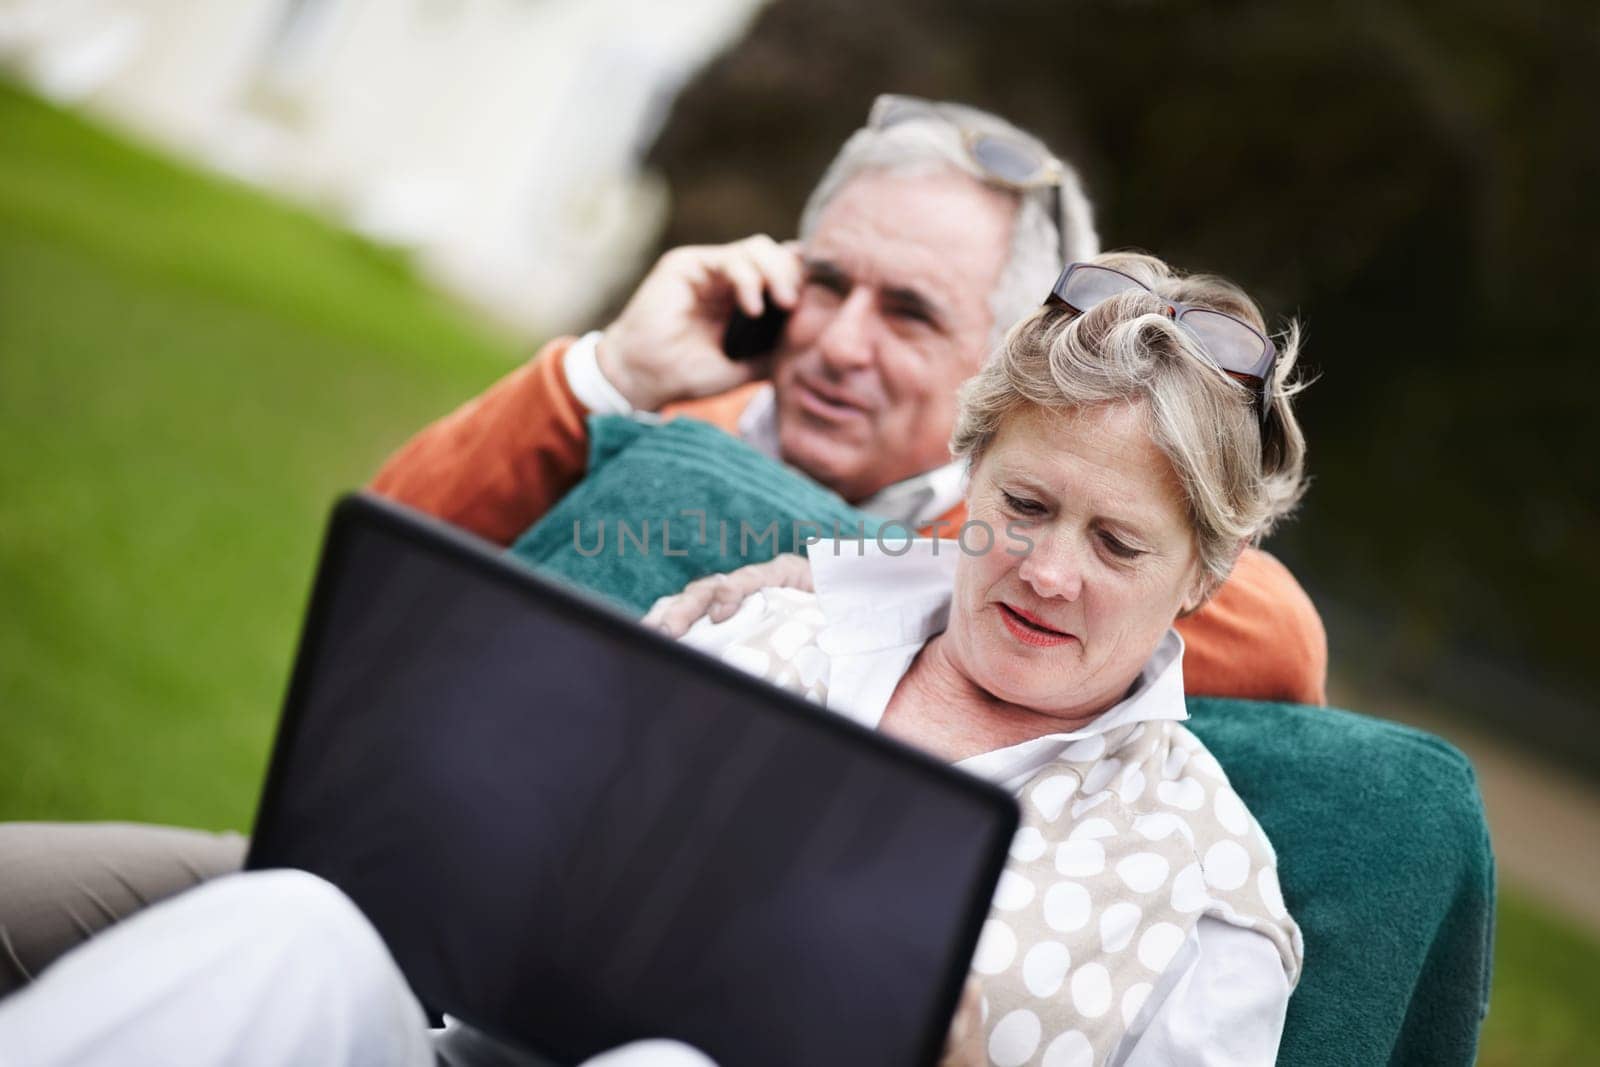 Phone call, laptop and travel with an old couple in a hotel garden for vacation at a luxury resort. Love, technology or communication with a senior man and woman tourist outdoor on grass at a lodge.